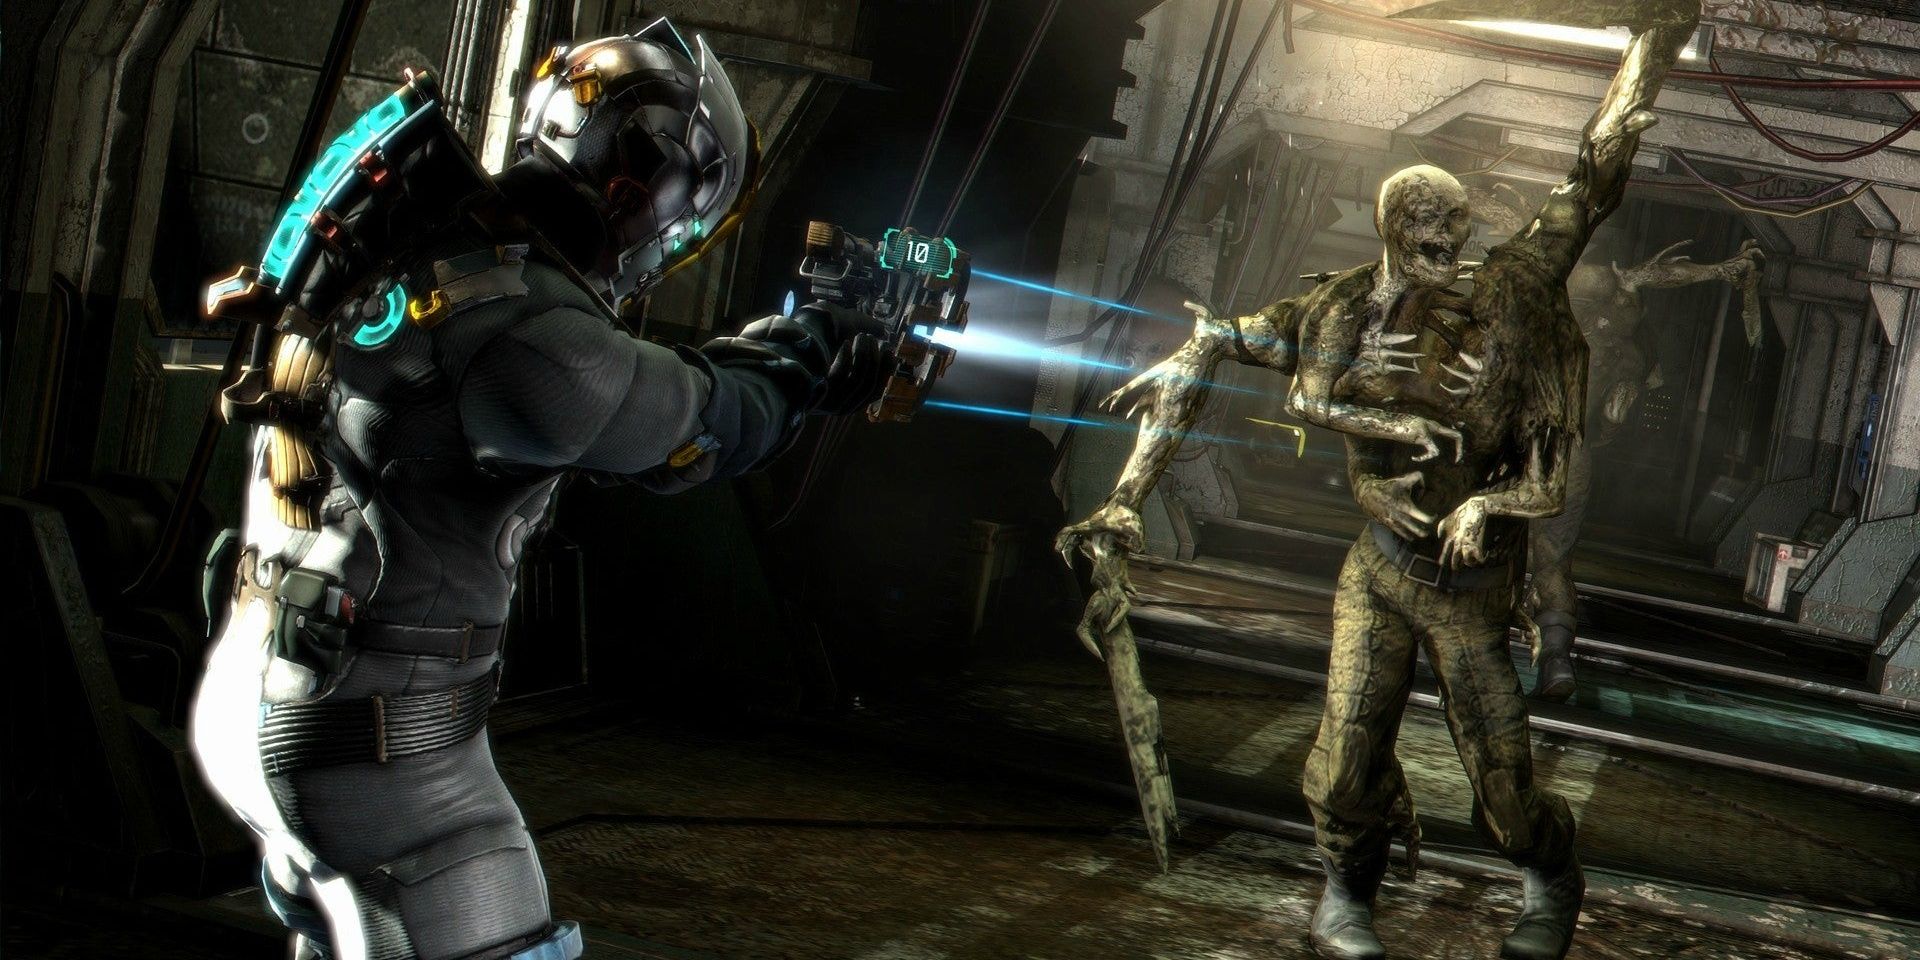 Isaac aims at a necromorph in Dead Space